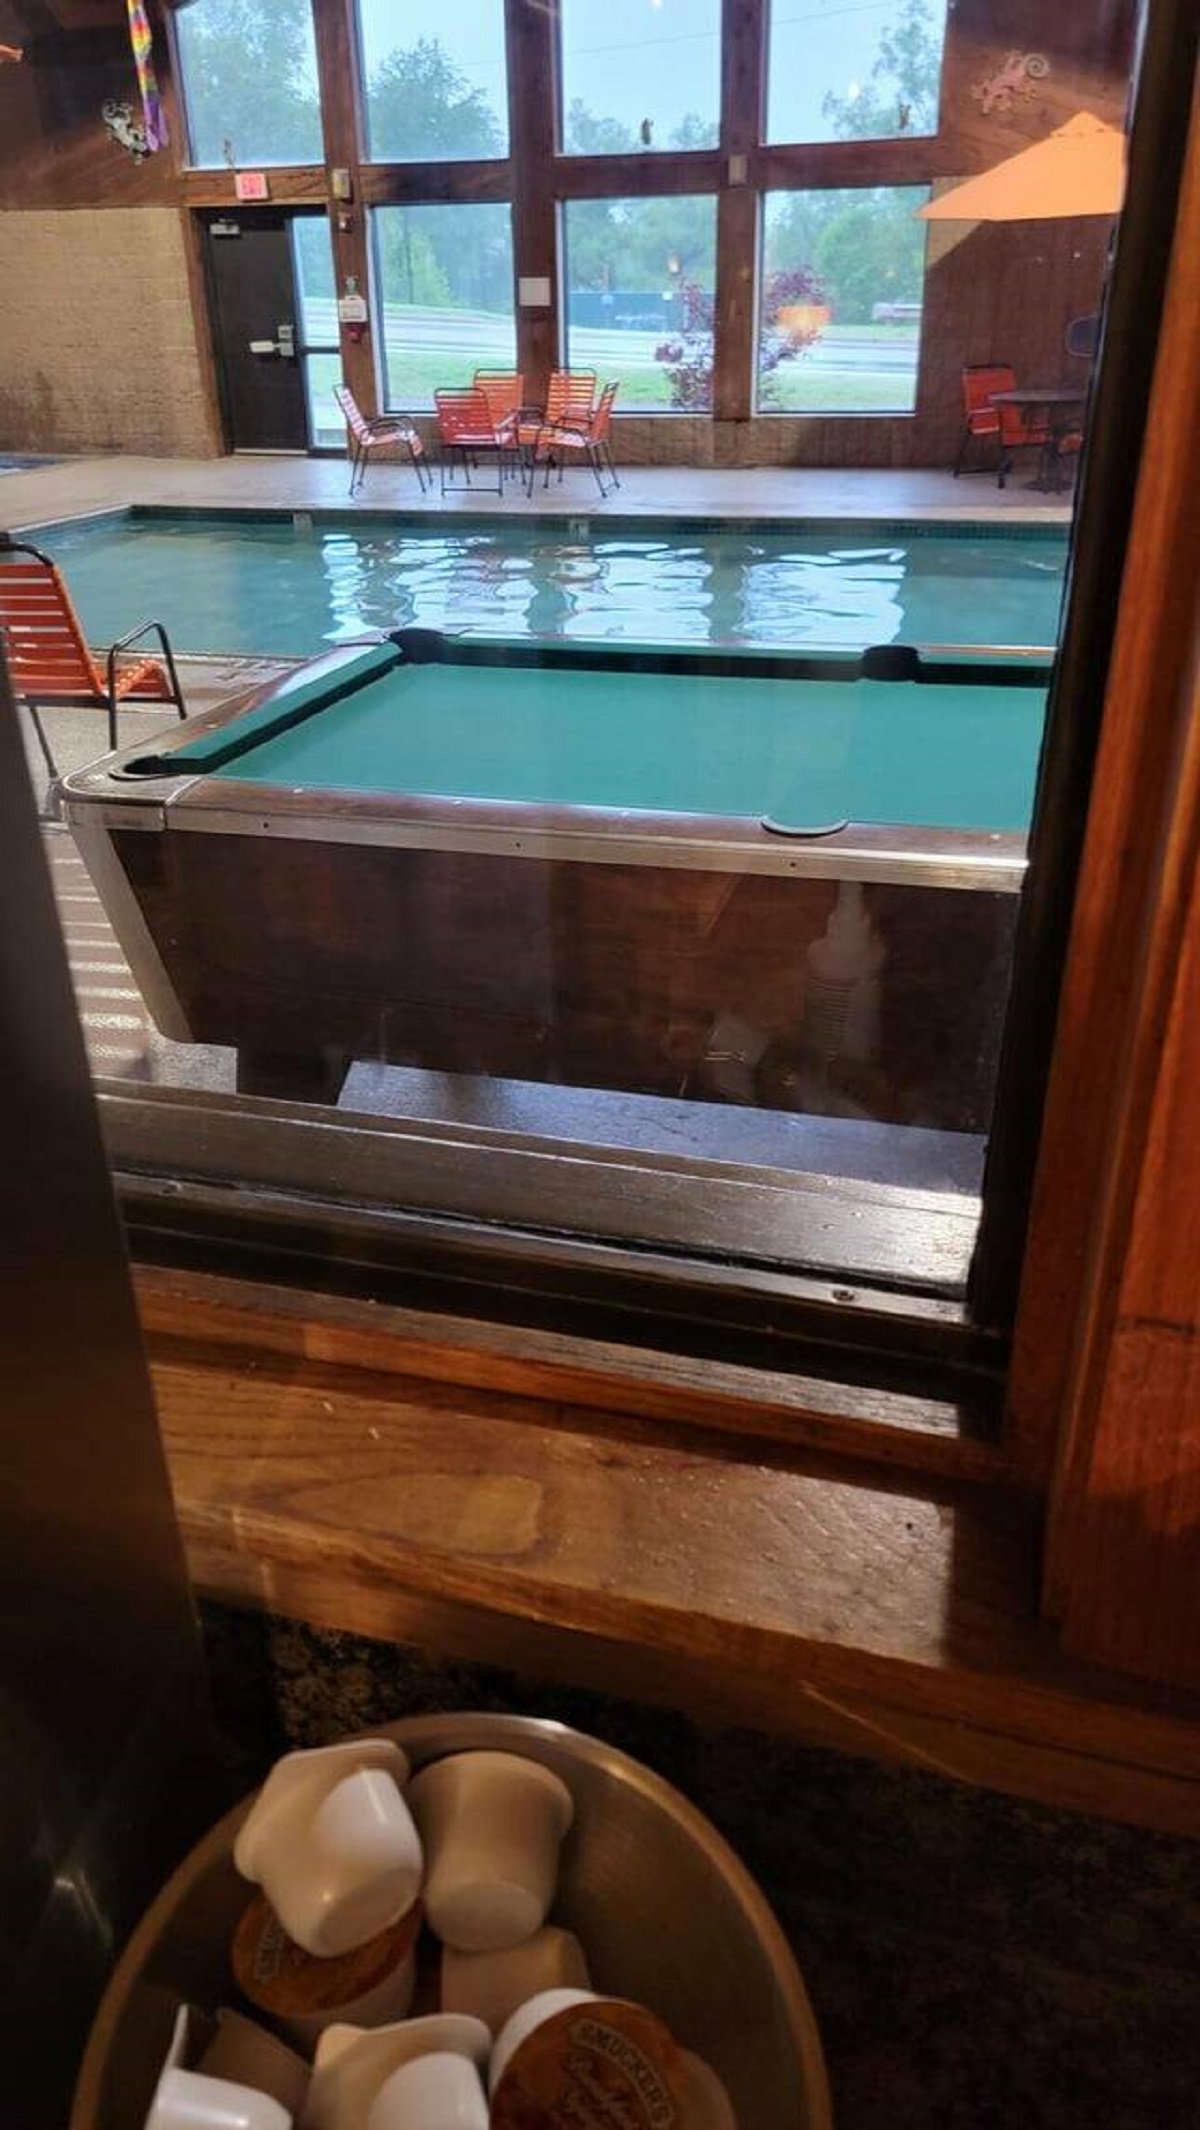 "Hotel I'm staying at has a pool table in the swimming pool room."